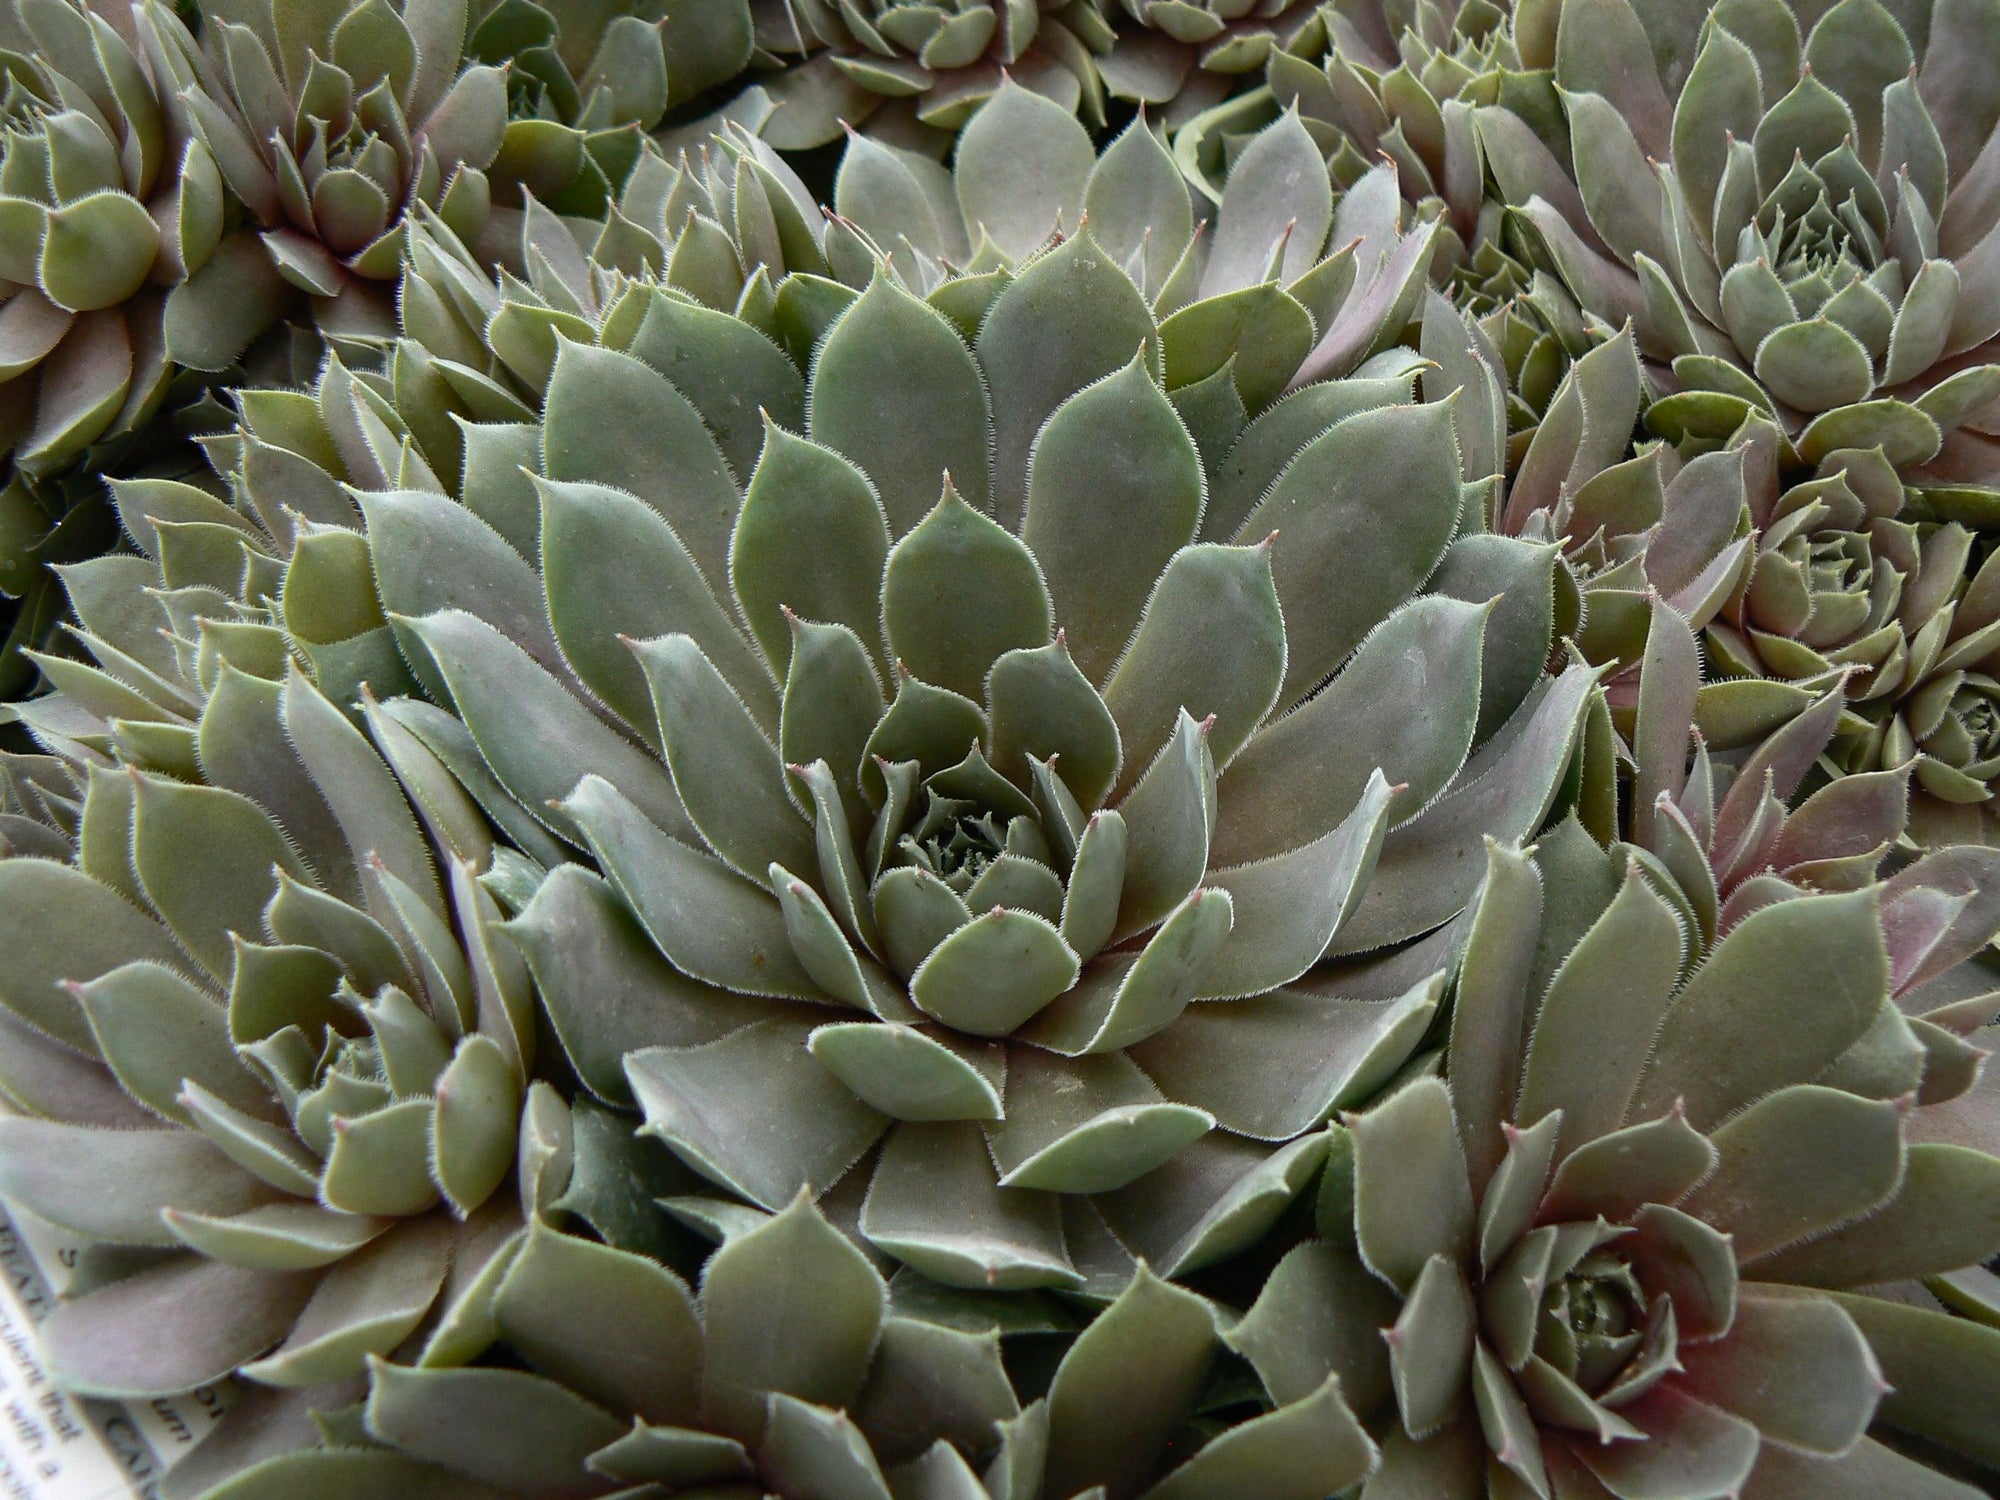 The Pacific Blue Ice Hens & Chicks is a low-maintenance succulent that is a breeze to care for. It forms attractive rosettes of fleshy leaves with a captivating blue-green flush. As the weather cools, the foliage undergoes a beautiful transformation, adopting a purple hue. This succulent is particularly well-suited for container gardening, adding a lovely touch to any arrangement.